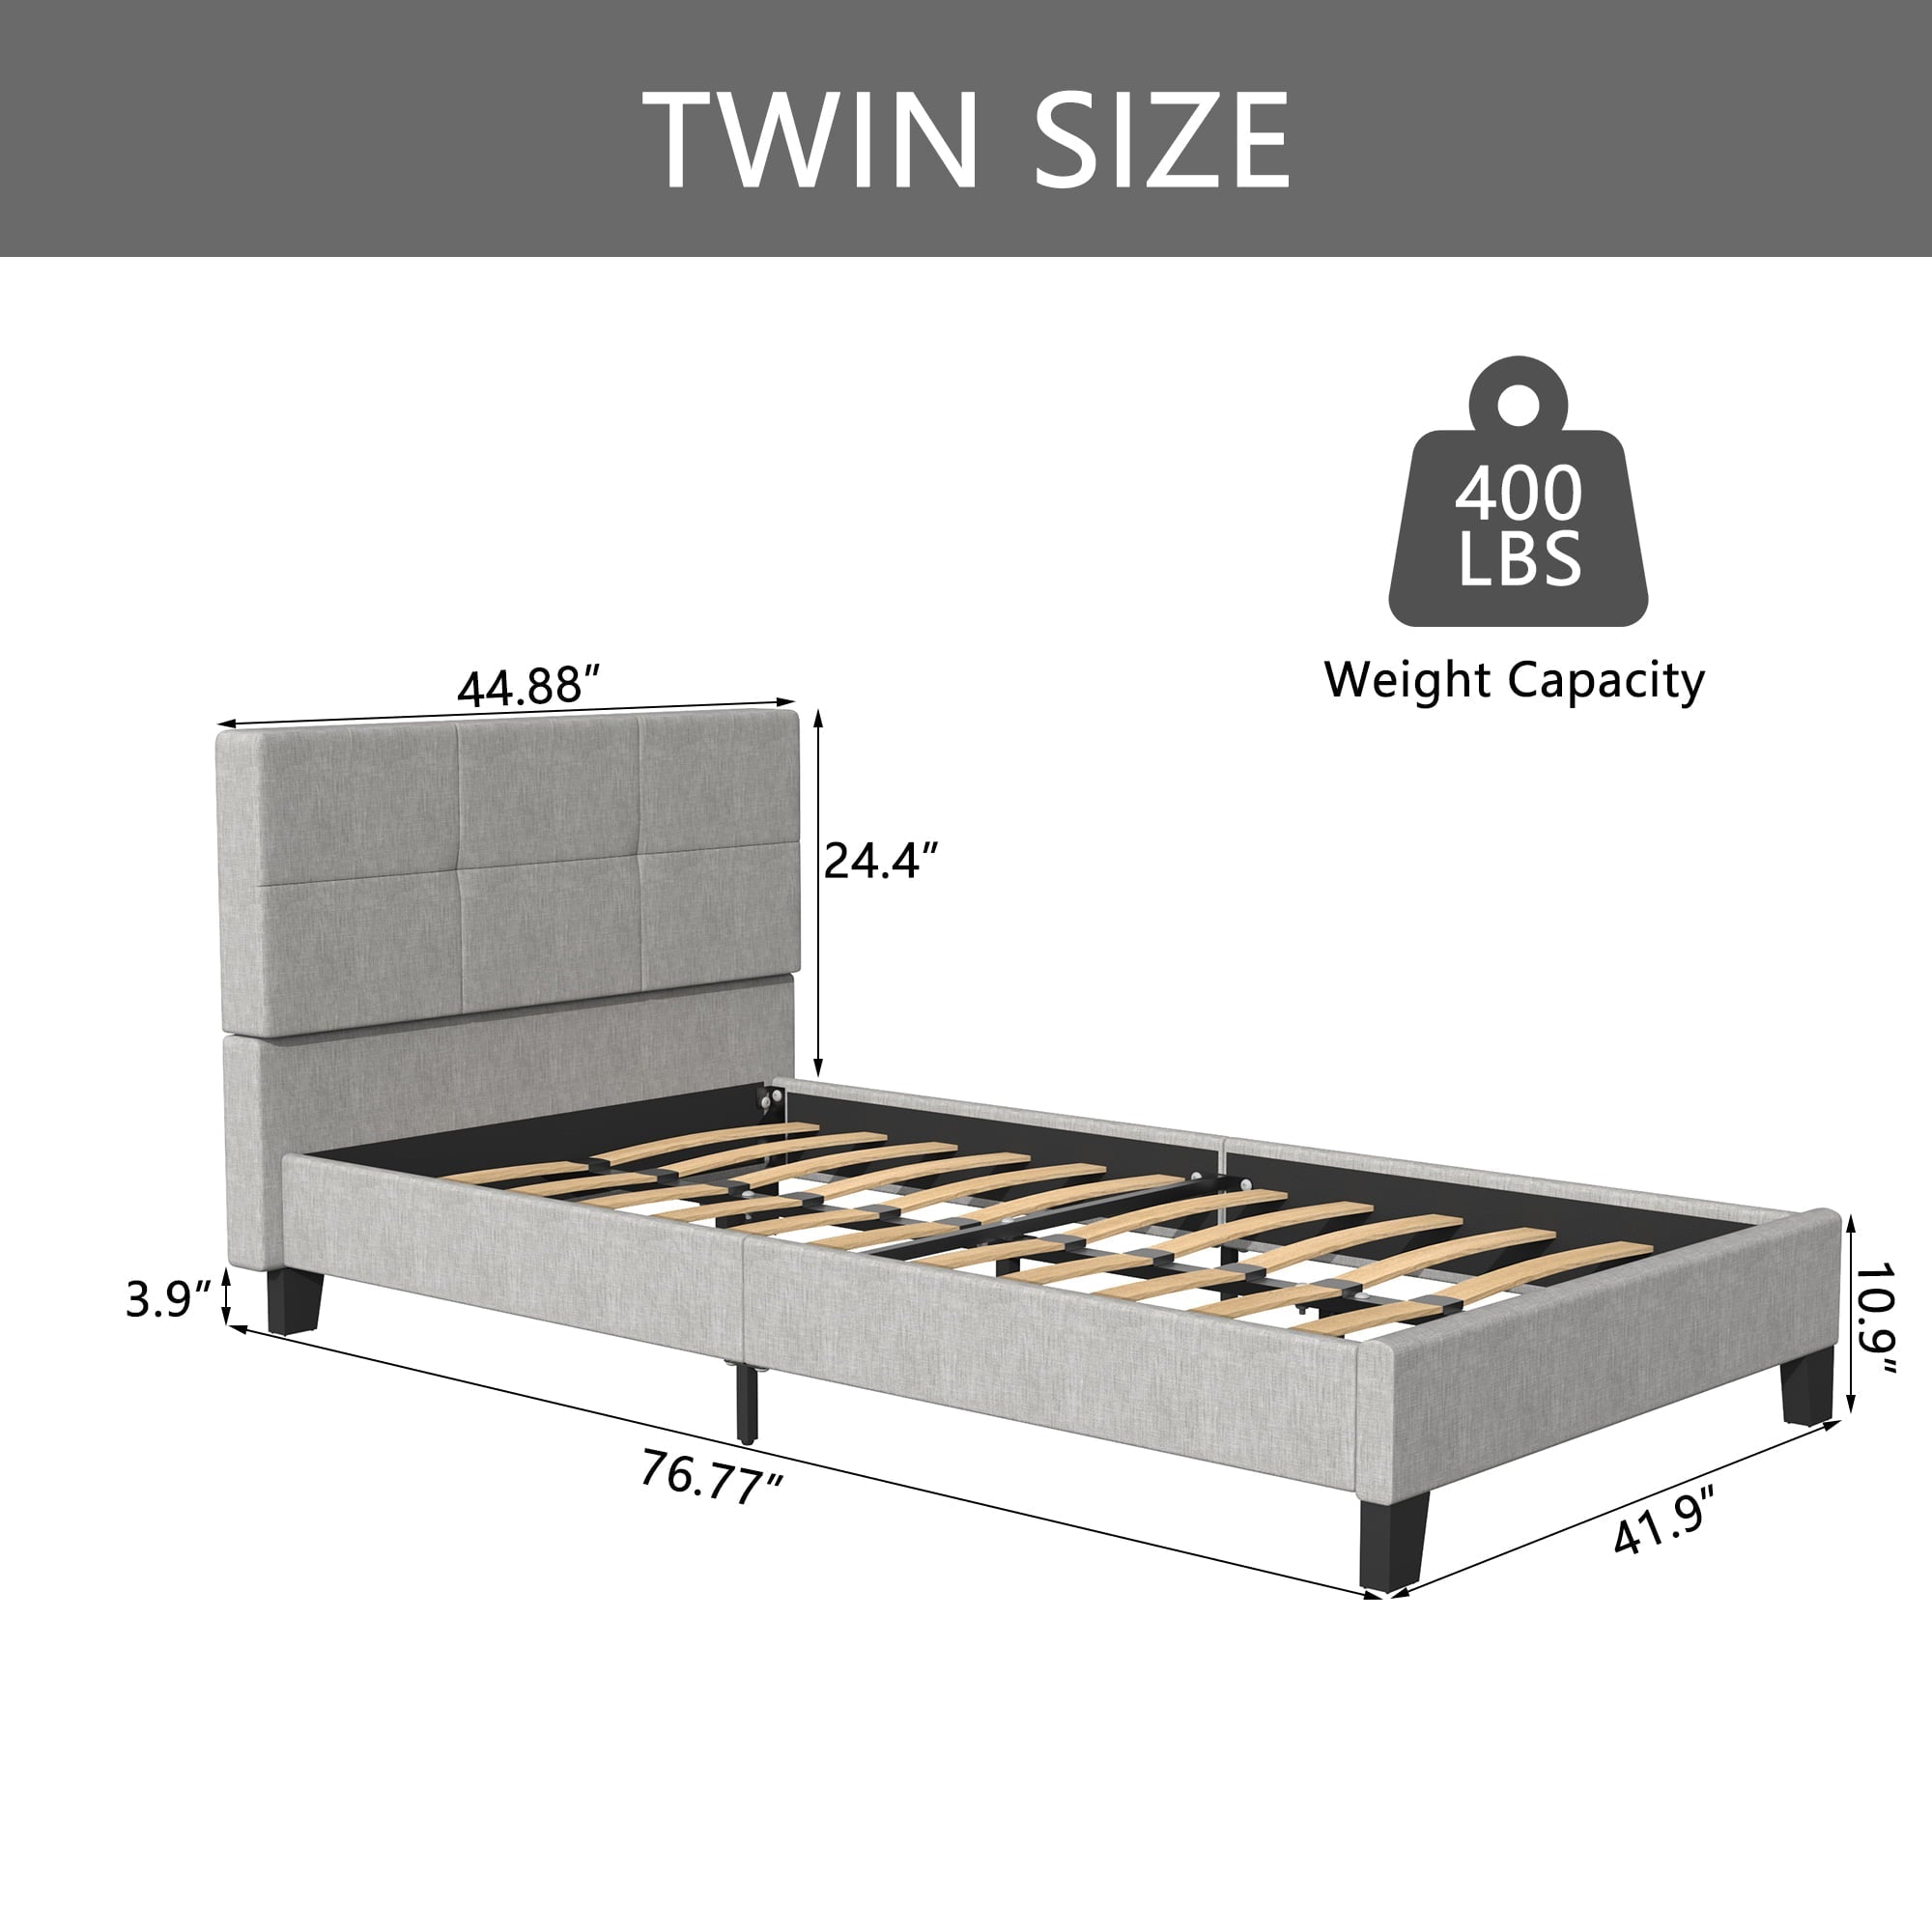 uhomepro Gray Twin Bed Frame for Adults Kids, Modern Fabric Upholstered Platform Bed Frame with Headboard, Twin Size Bed Frame Bedroom Furniture with Wood Slats Support, No Box Spring Needed